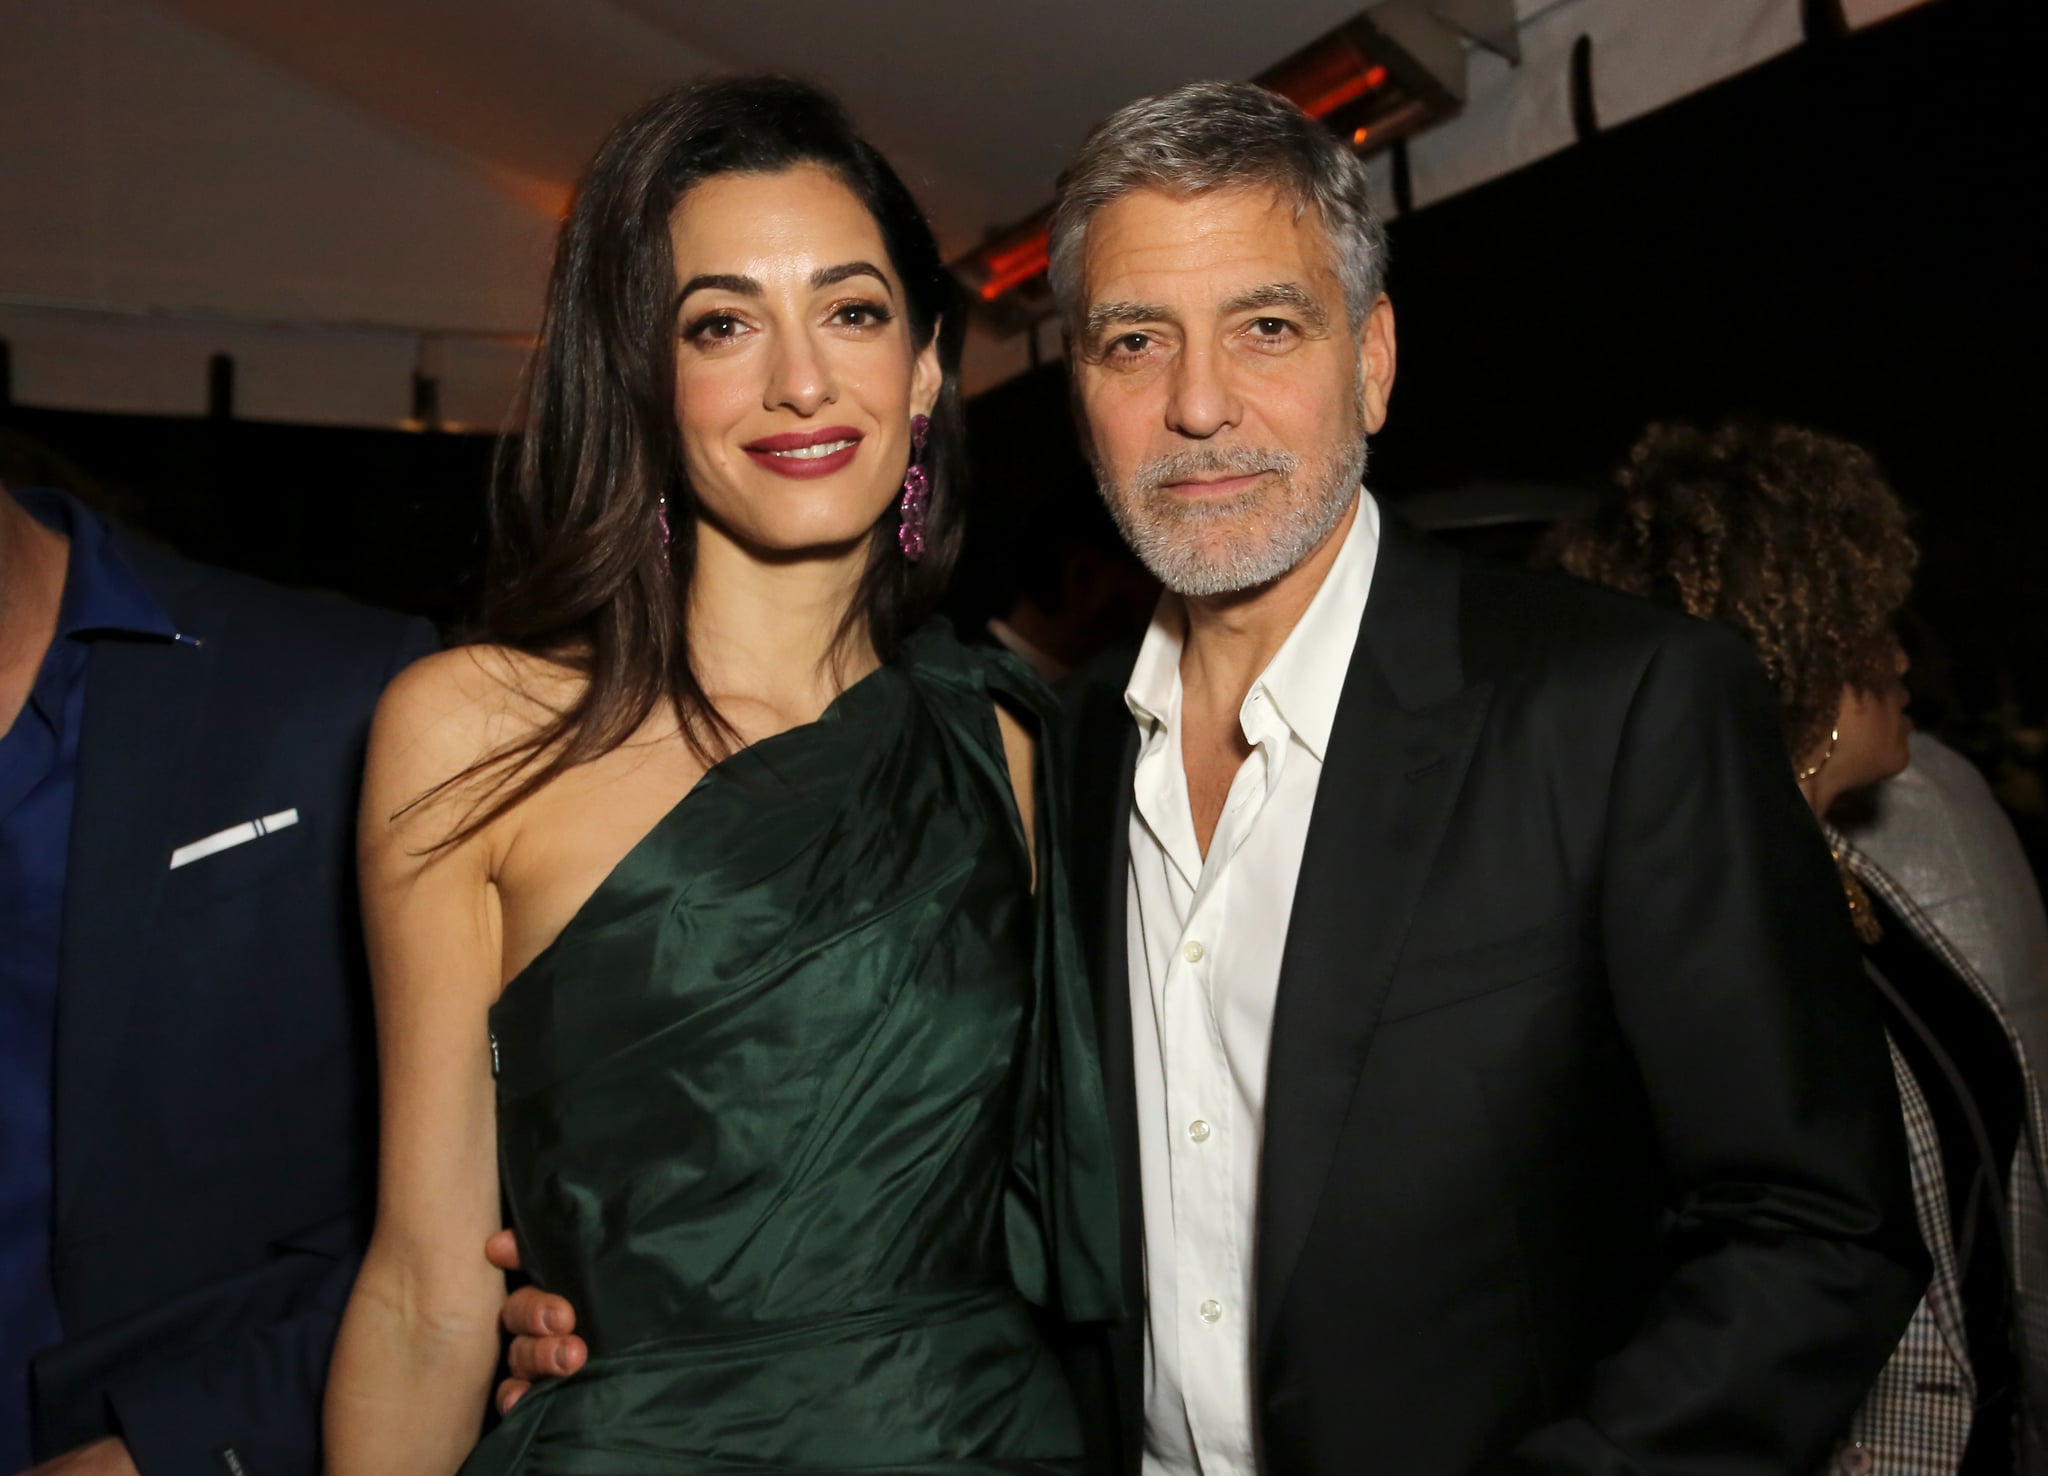 George and Amal Clooney Pledge $100,000 For Beirut Relief: We “Hope Others Will Help”